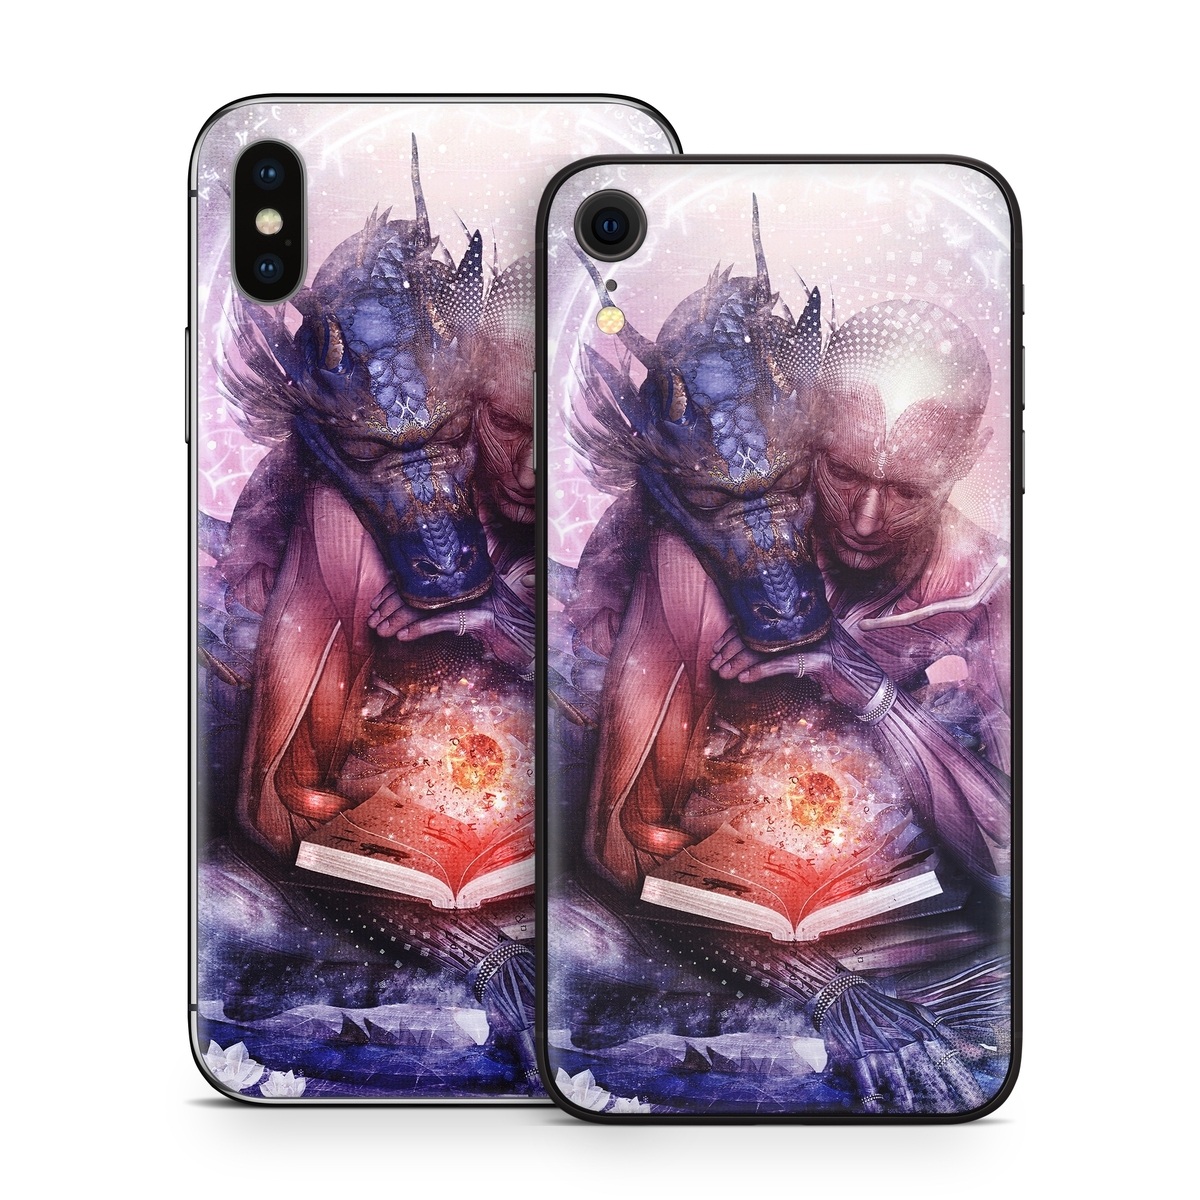 iPhone XS Skin design of Cg artwork, Illustration, Graphic design, Fictional character, Mythology, Graphics, Space, Art, Darkness, with blue, black, red, yellow, white colors